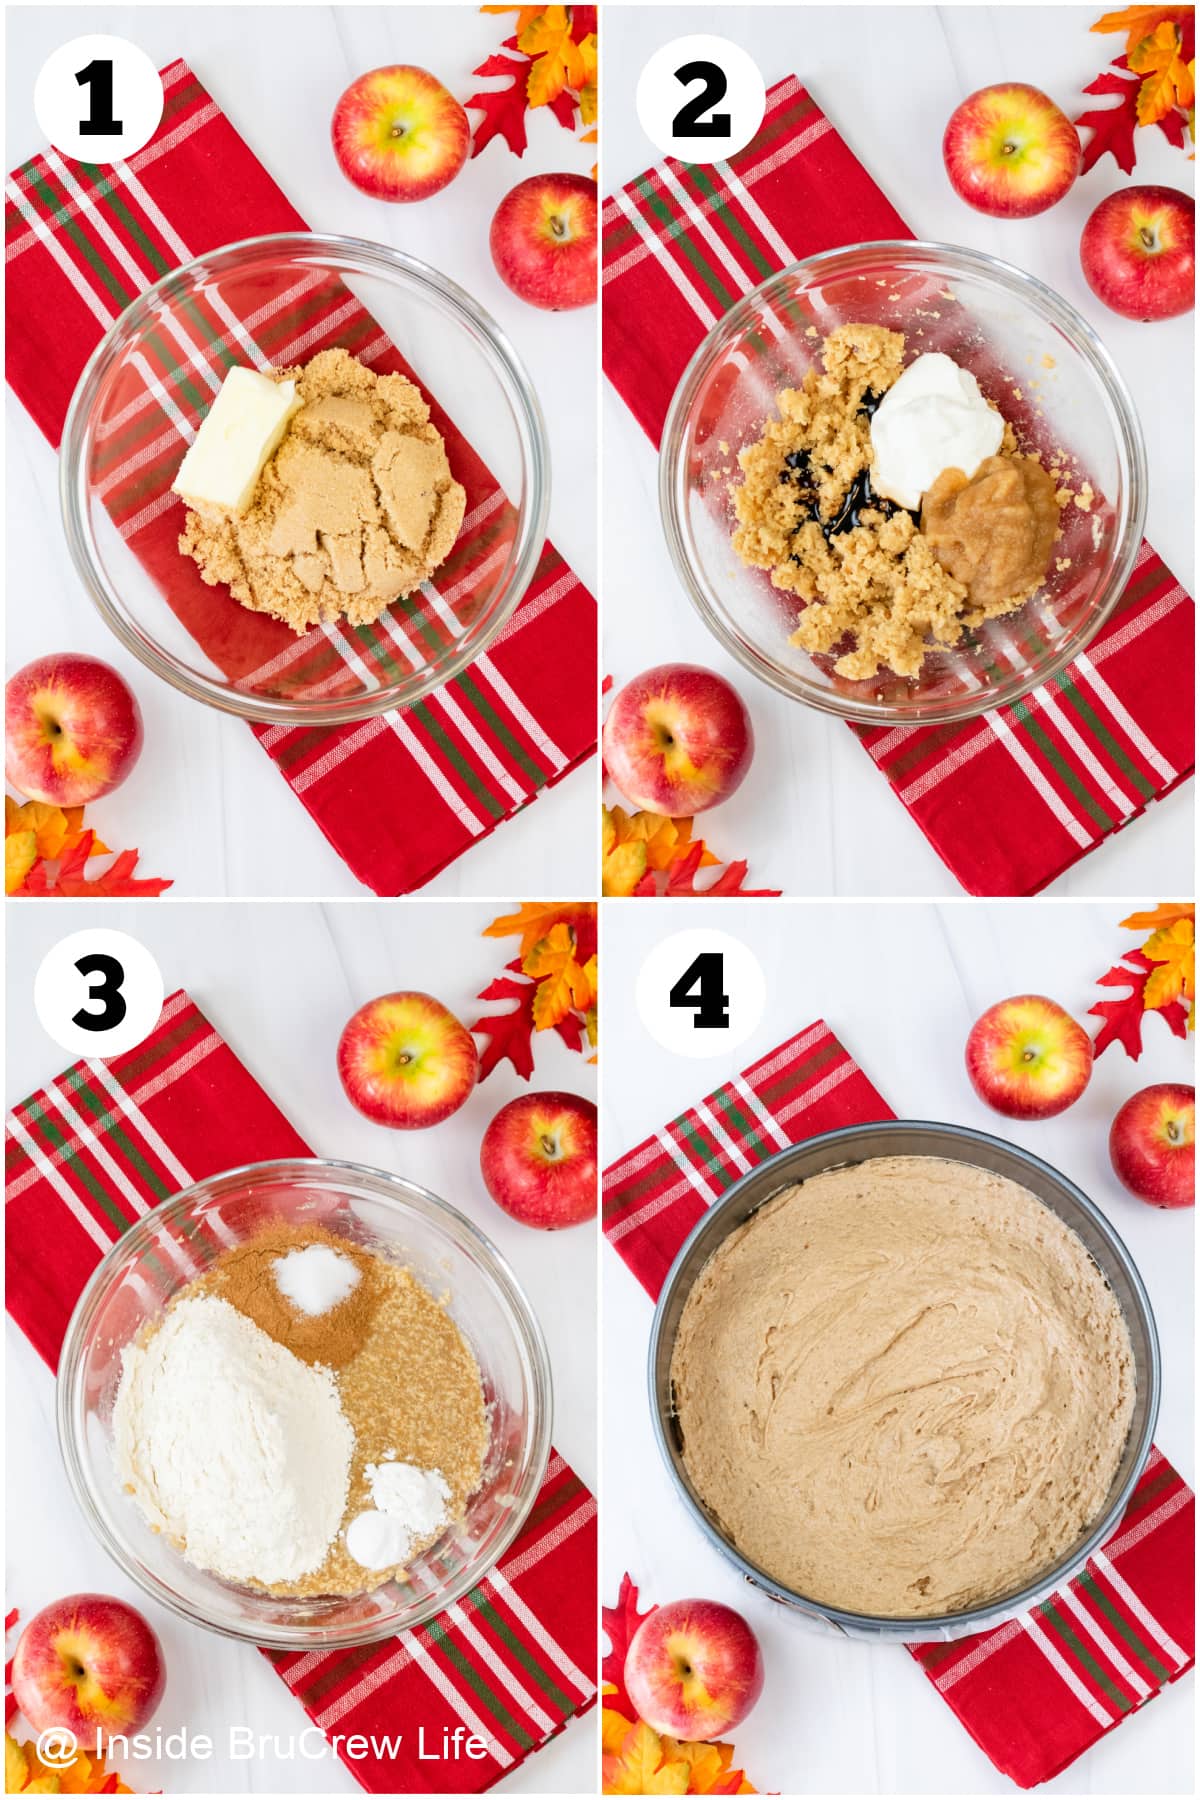 Four pictures collaged together showing how to make apple cake batter.